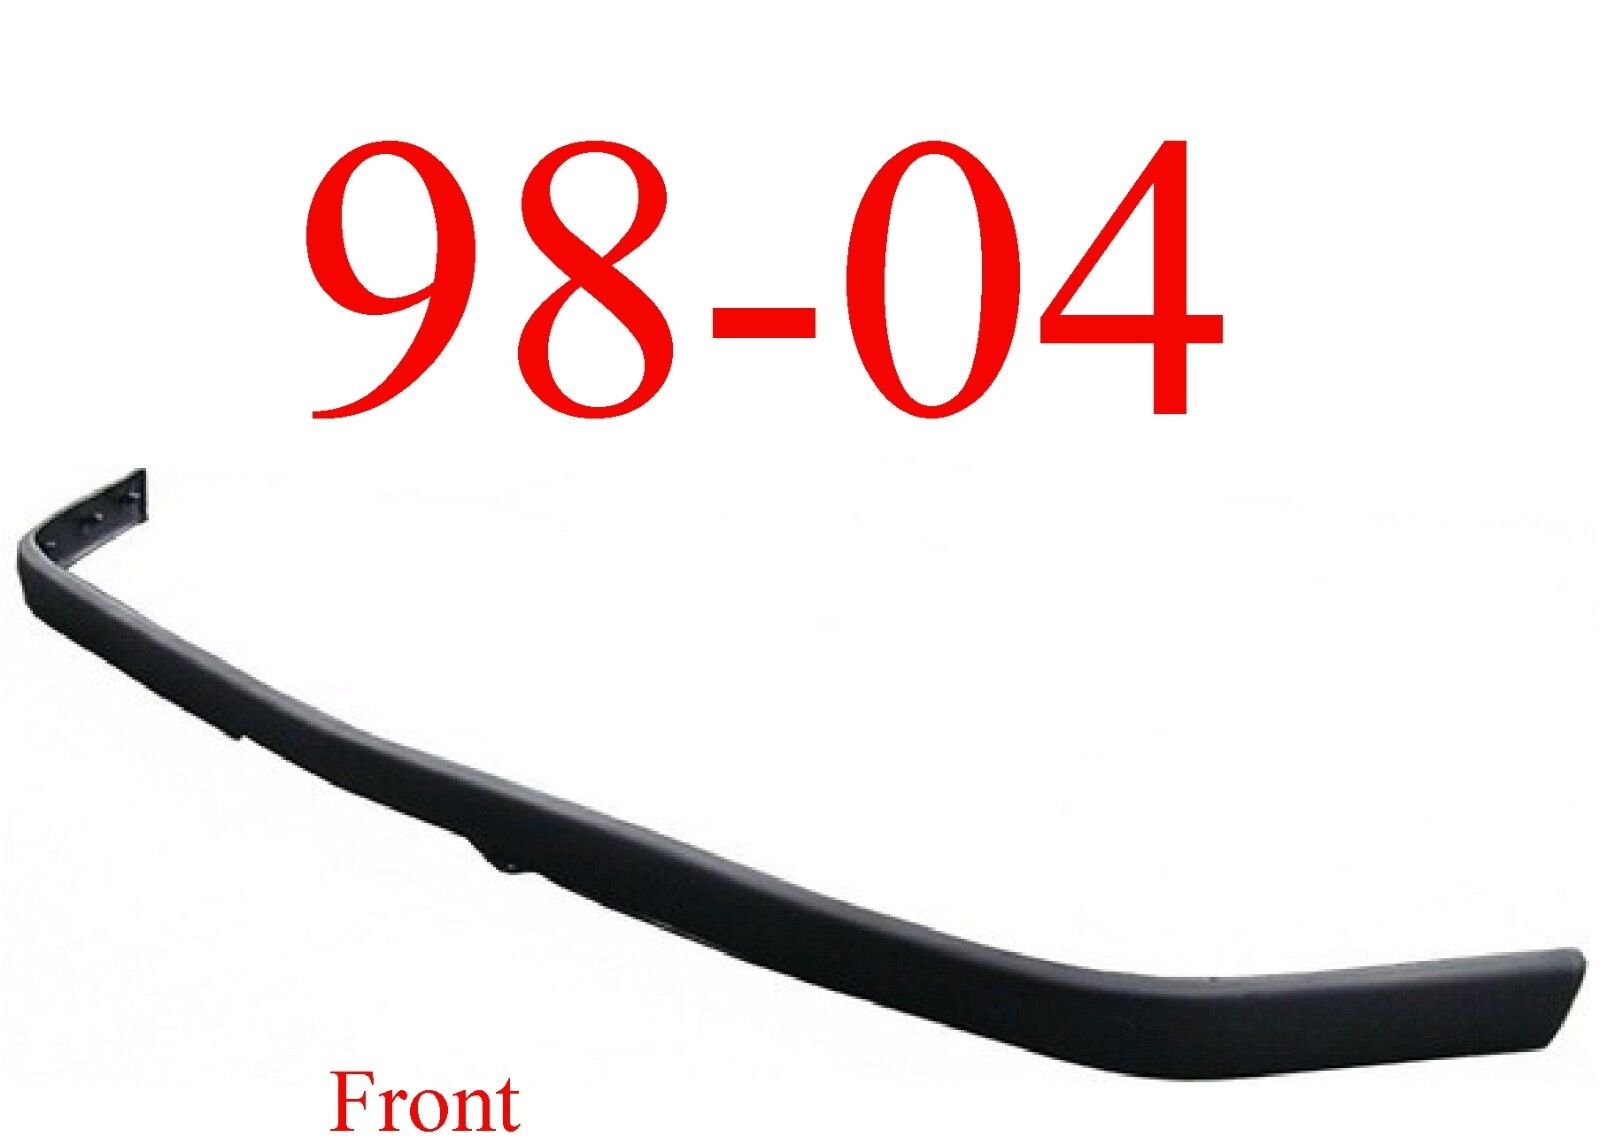 98 04 Chevy S10 Front Bumper Impact Strip With LS, 98 05 S10 Blazer